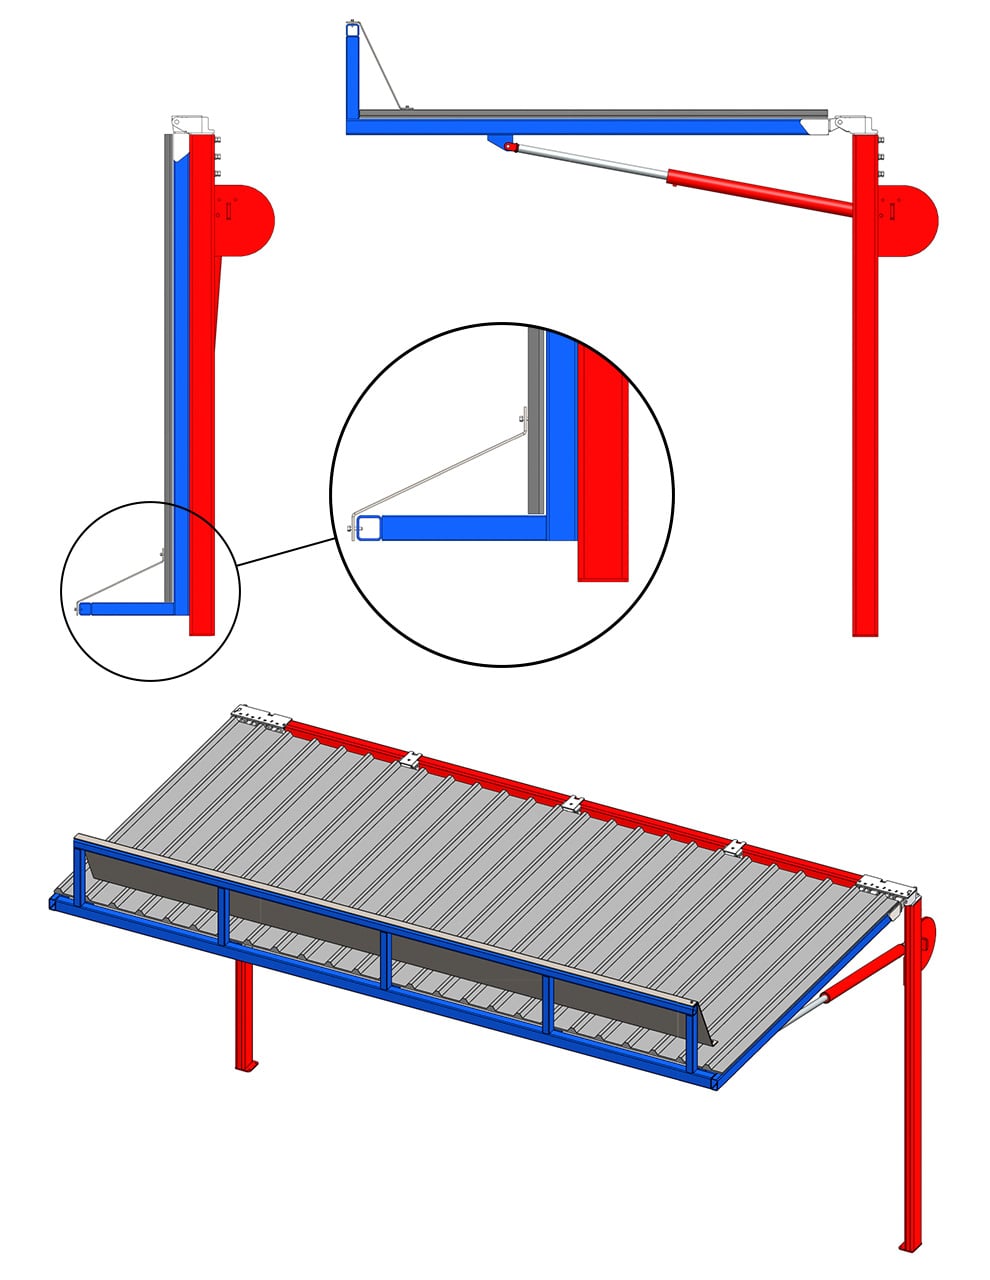 Diagrams of External Truss Cover Designed By Schweiss Shown Open